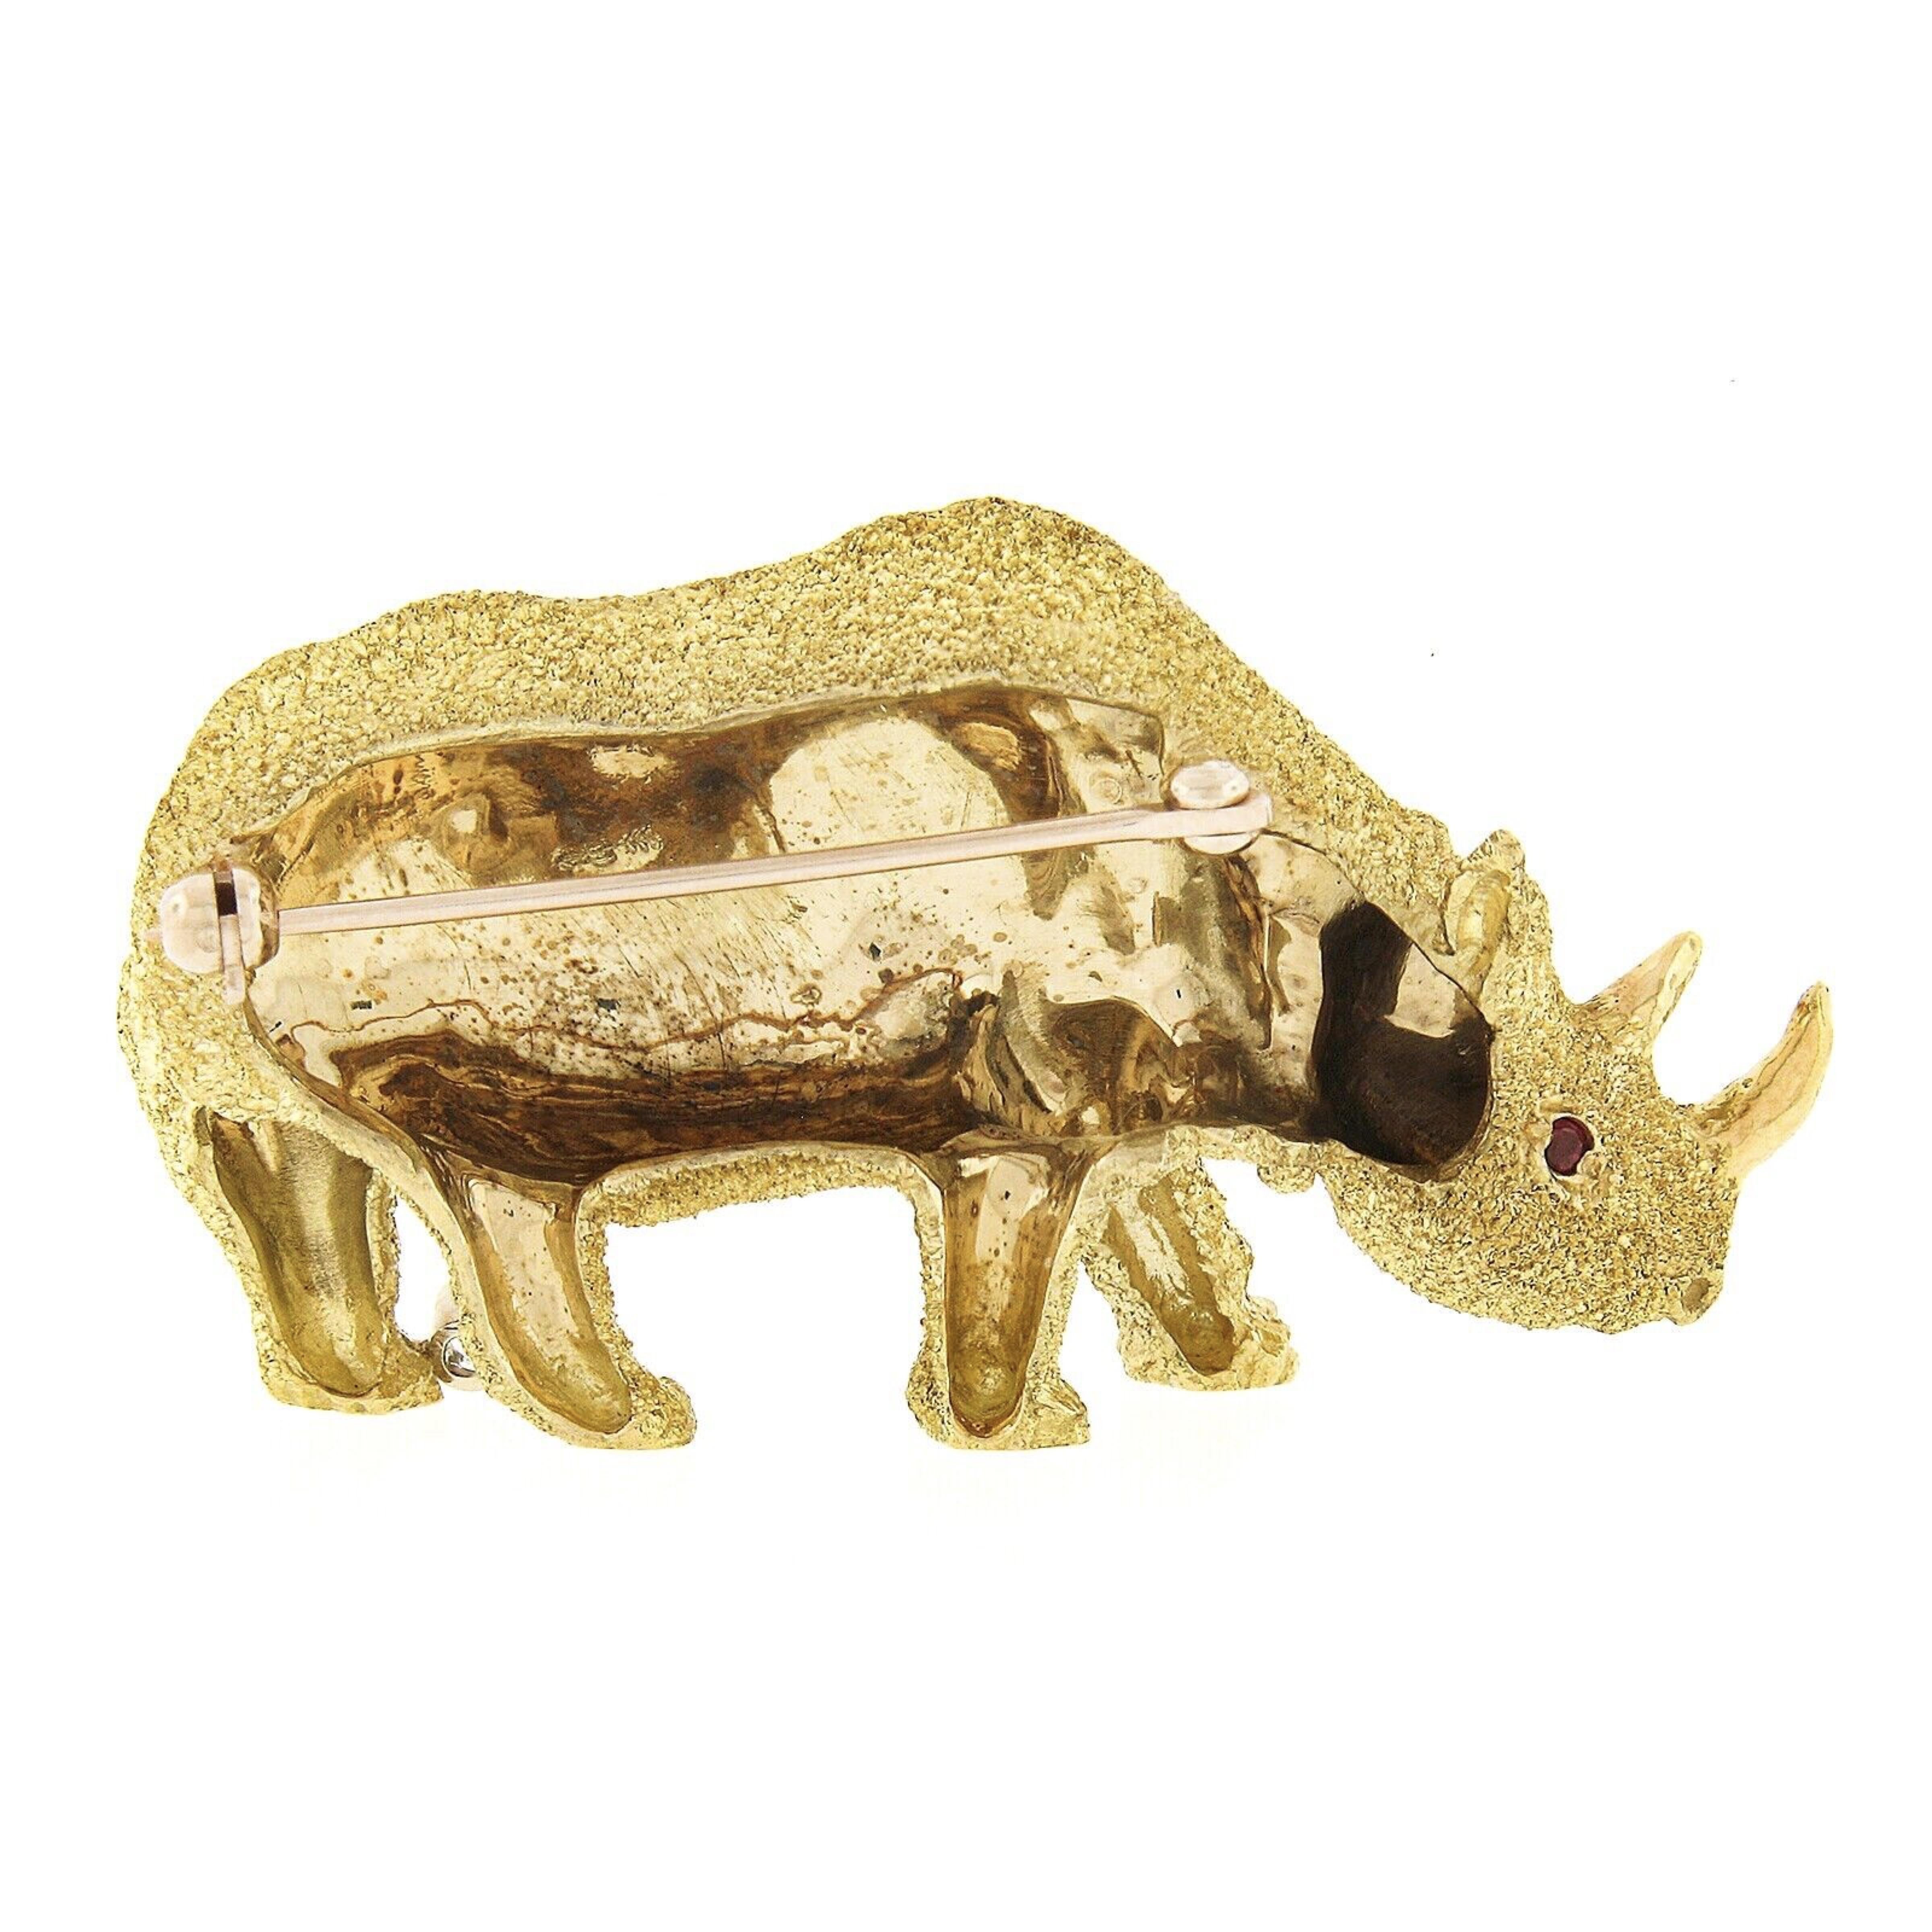 This incredible vintage brooch/pin is designed by Craig Drake and very well crafted in solid 18k yellow gold. It features a perfectly structured standing rhinoceros design with unique, and remarkably outstanding workmanship and texture throughout